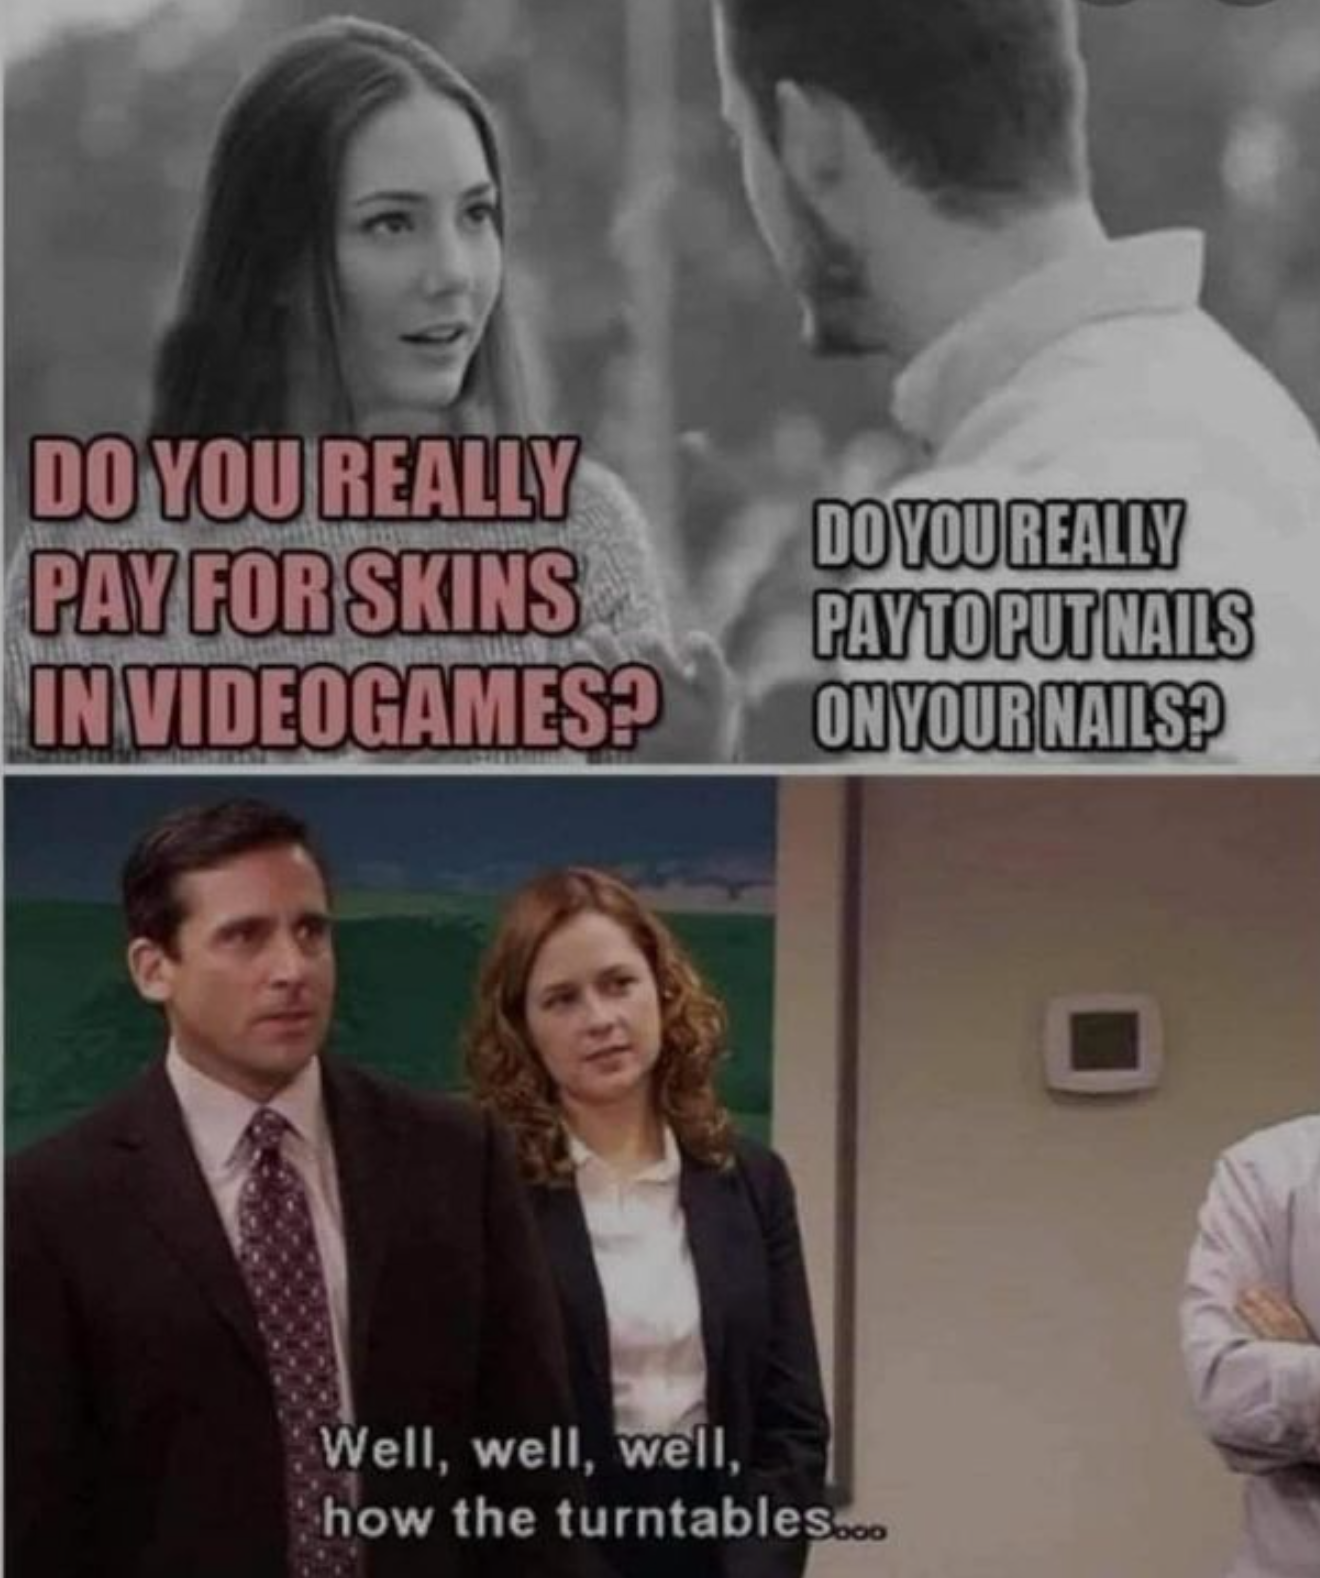 funny gaming memes - photo caption - Do You Really Pay For Skins In Videogames? Do You Really Payto Put Nails On Your Nails? Well, well, well, how the turntables.com